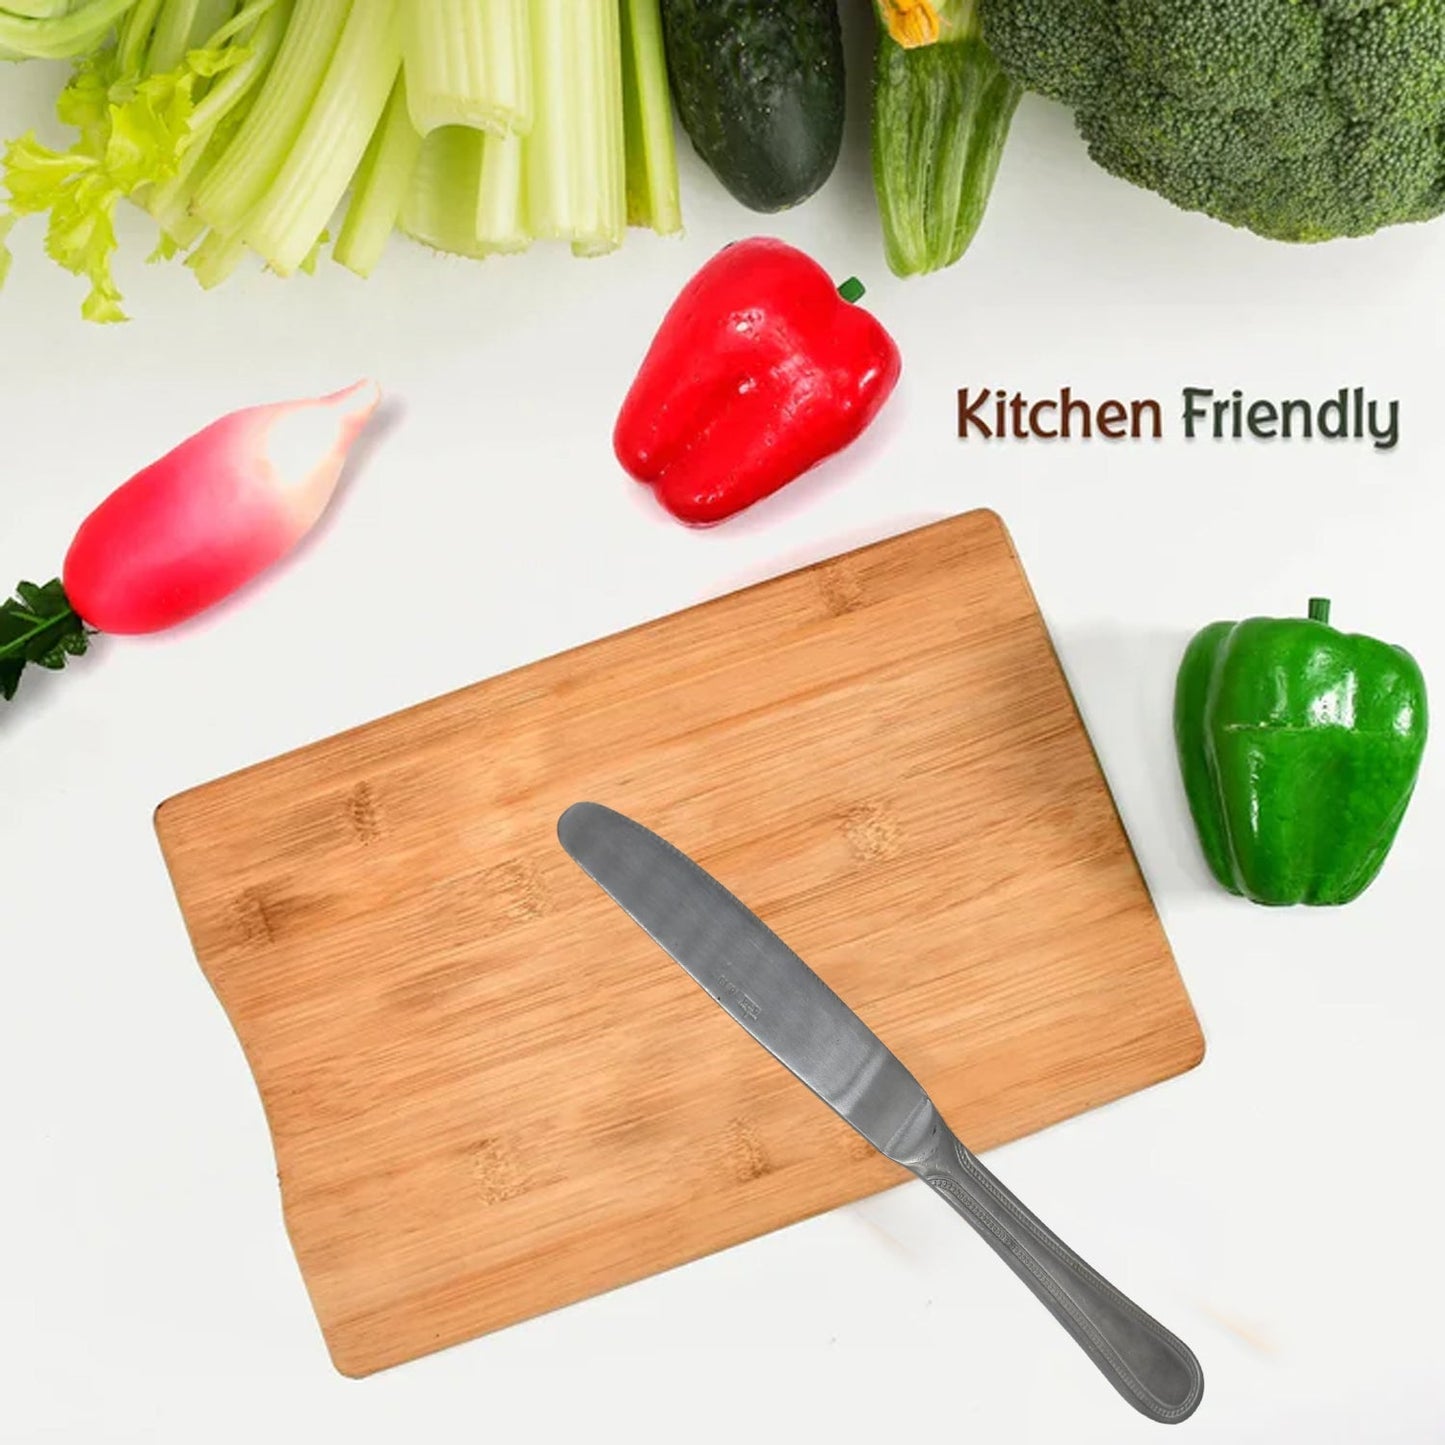 5931_steel_kitchen_ki5931 STAINLESS STEEL KNIFE AND KITCHEN KNIFE WITH STEEL HANDLE KNIFE PREMINUM KNIFE nfe